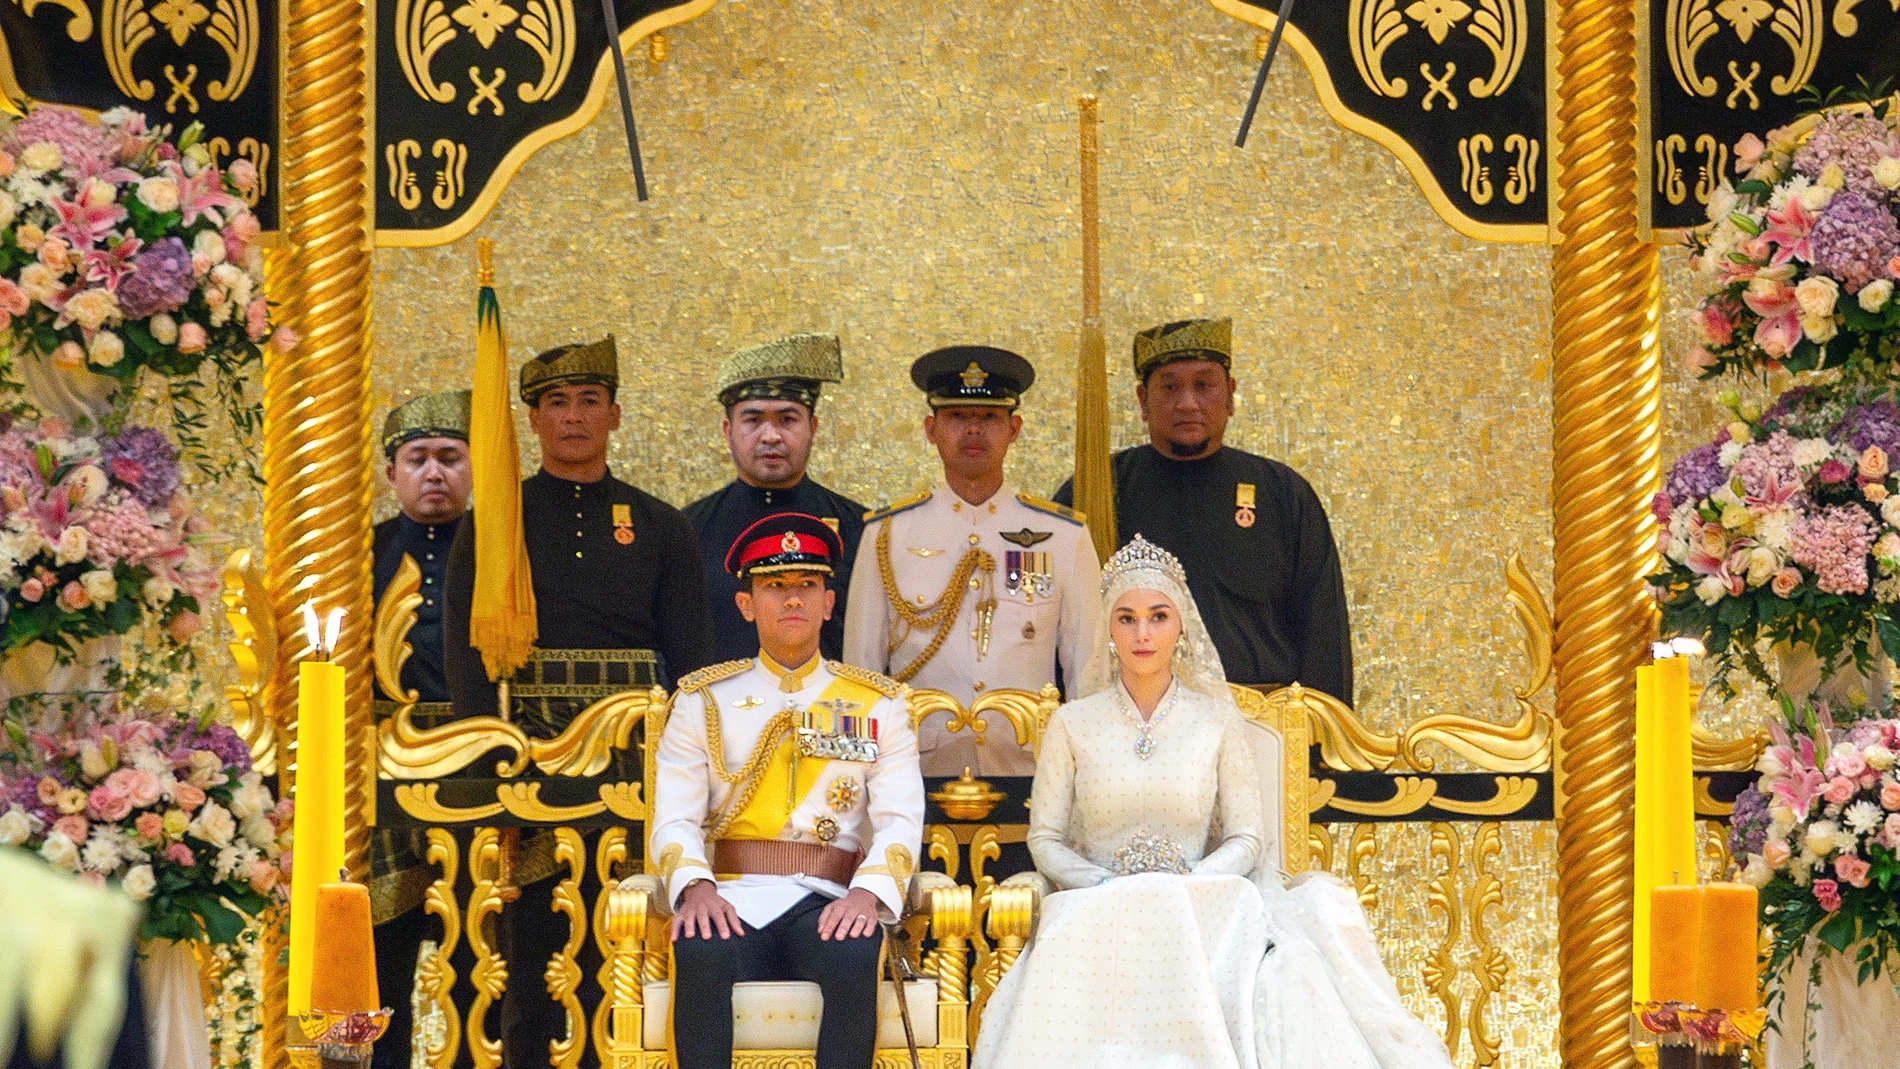 Bandar Seri Begawan (Brunei), 14/01/2024.- The royal couple Prince Abdul Mateen (L) and his bride Anisha Rosnah (R) during the royal wedding ceremony at Istana Nurul Iman, in Bandar Seri Begawan, Brunei, 14 January 2024. Brunei's Prince Abdul Mateen, known as one of Asia's most eligible bachelors, weds his fiancee Anisha Rosnah in a lavish 10-day celebration that culminates in a royal wedding ceremony and procession on 14 January. EFE/EPA/RUDOLF PORTILLO 